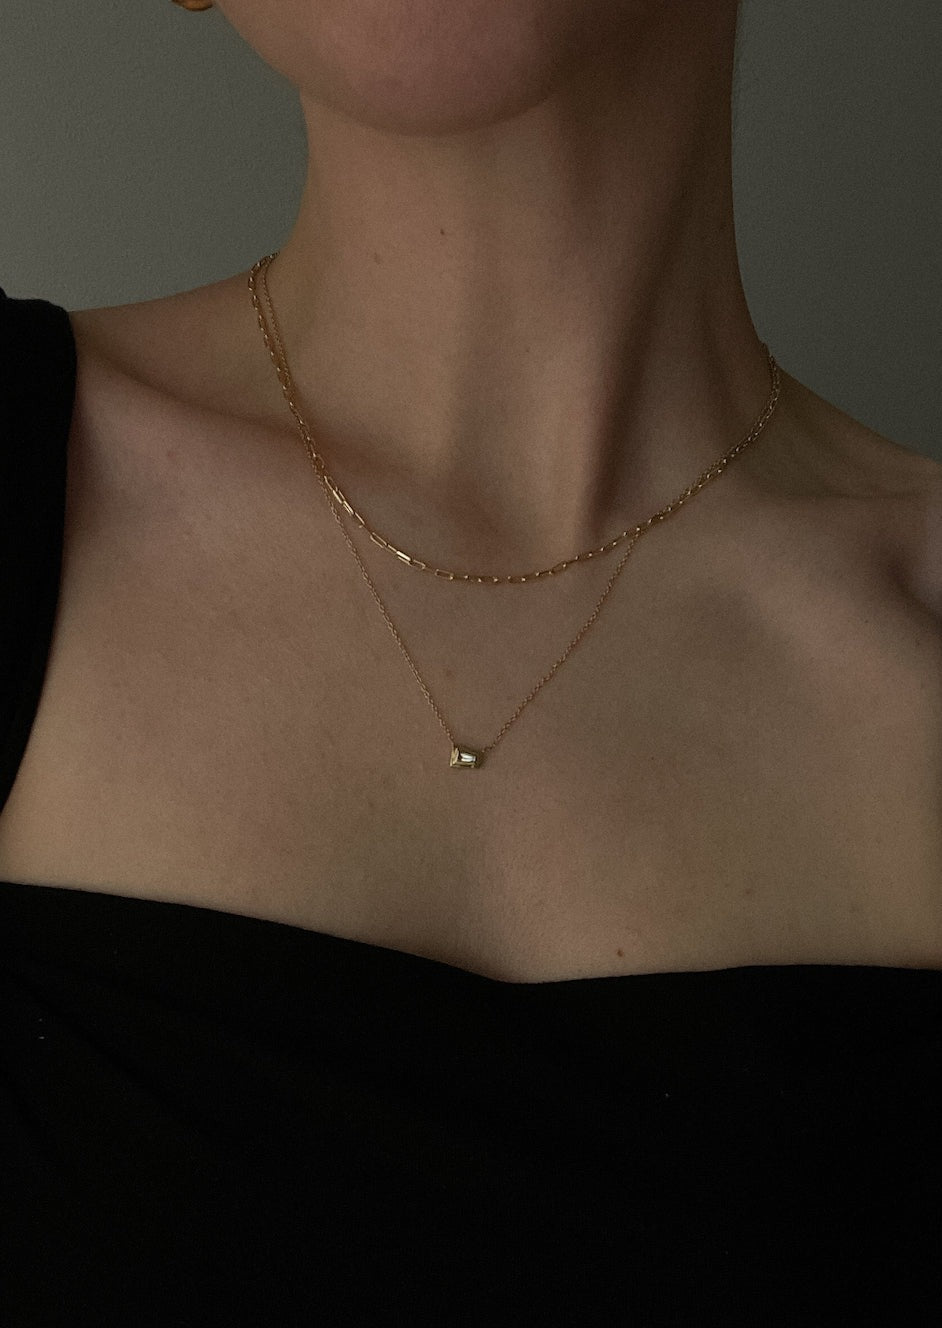 alt="Colette Tapered Necklace styled with the pick link chain necklace"